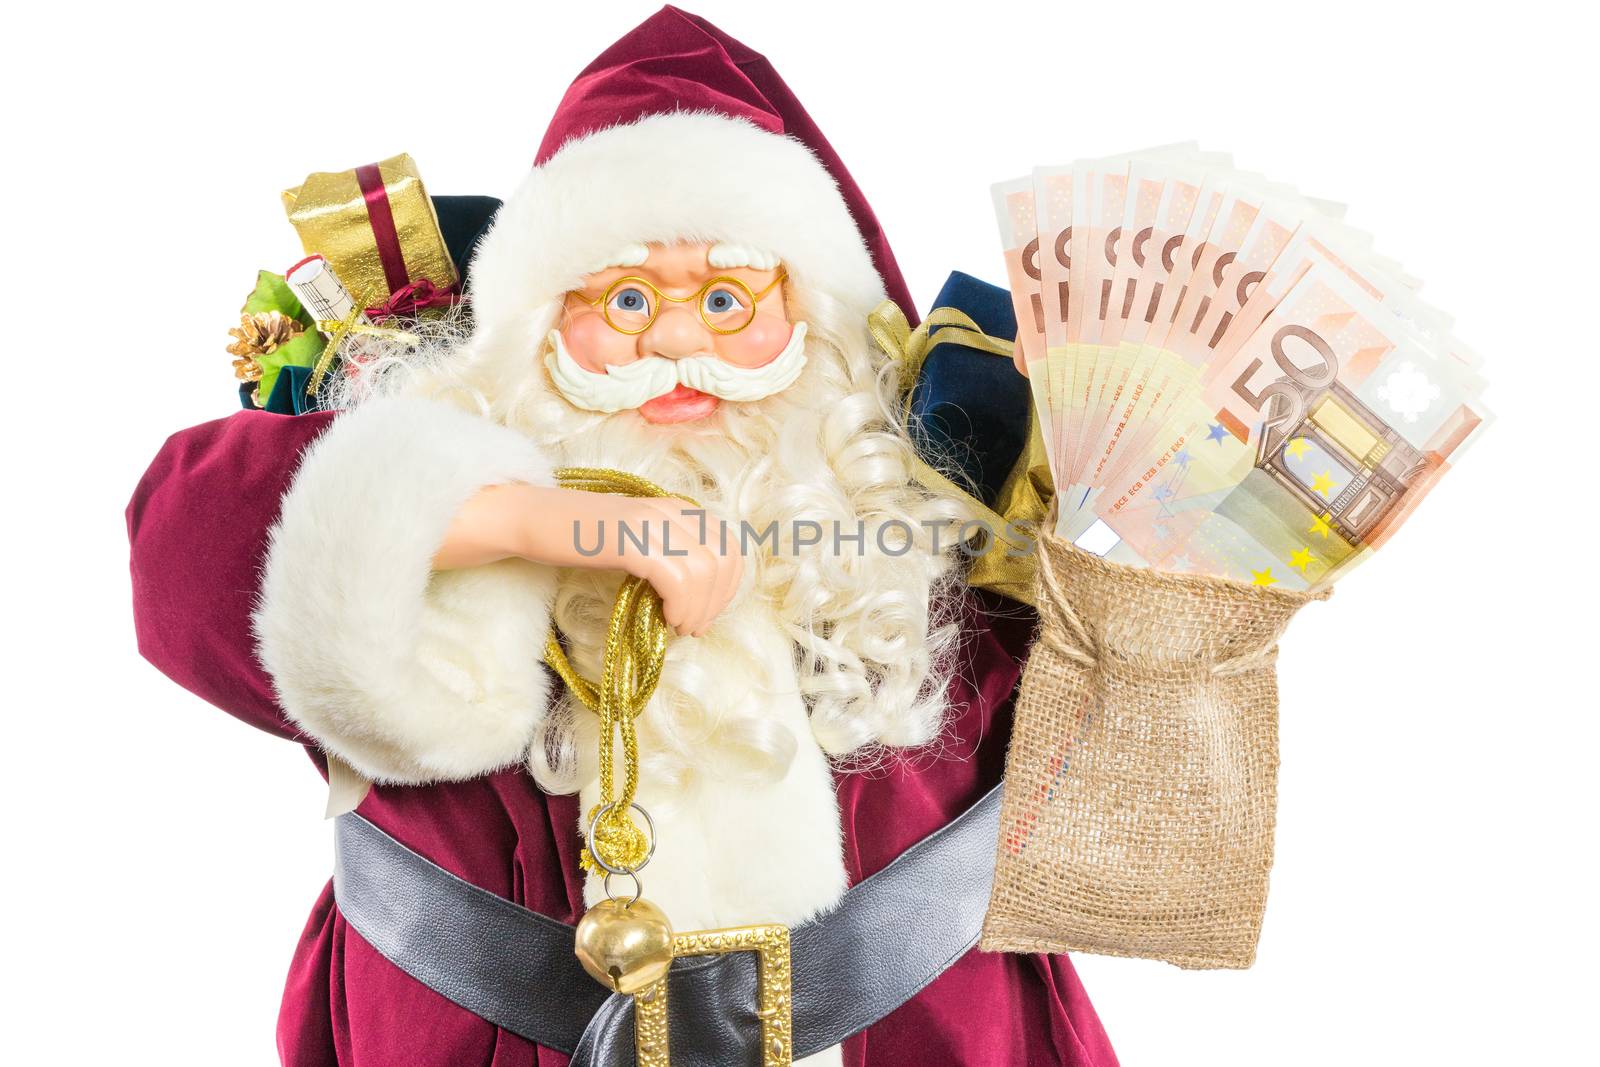 Model of Santa Claus with ringing bell presents and euro money in bag isolated on white background